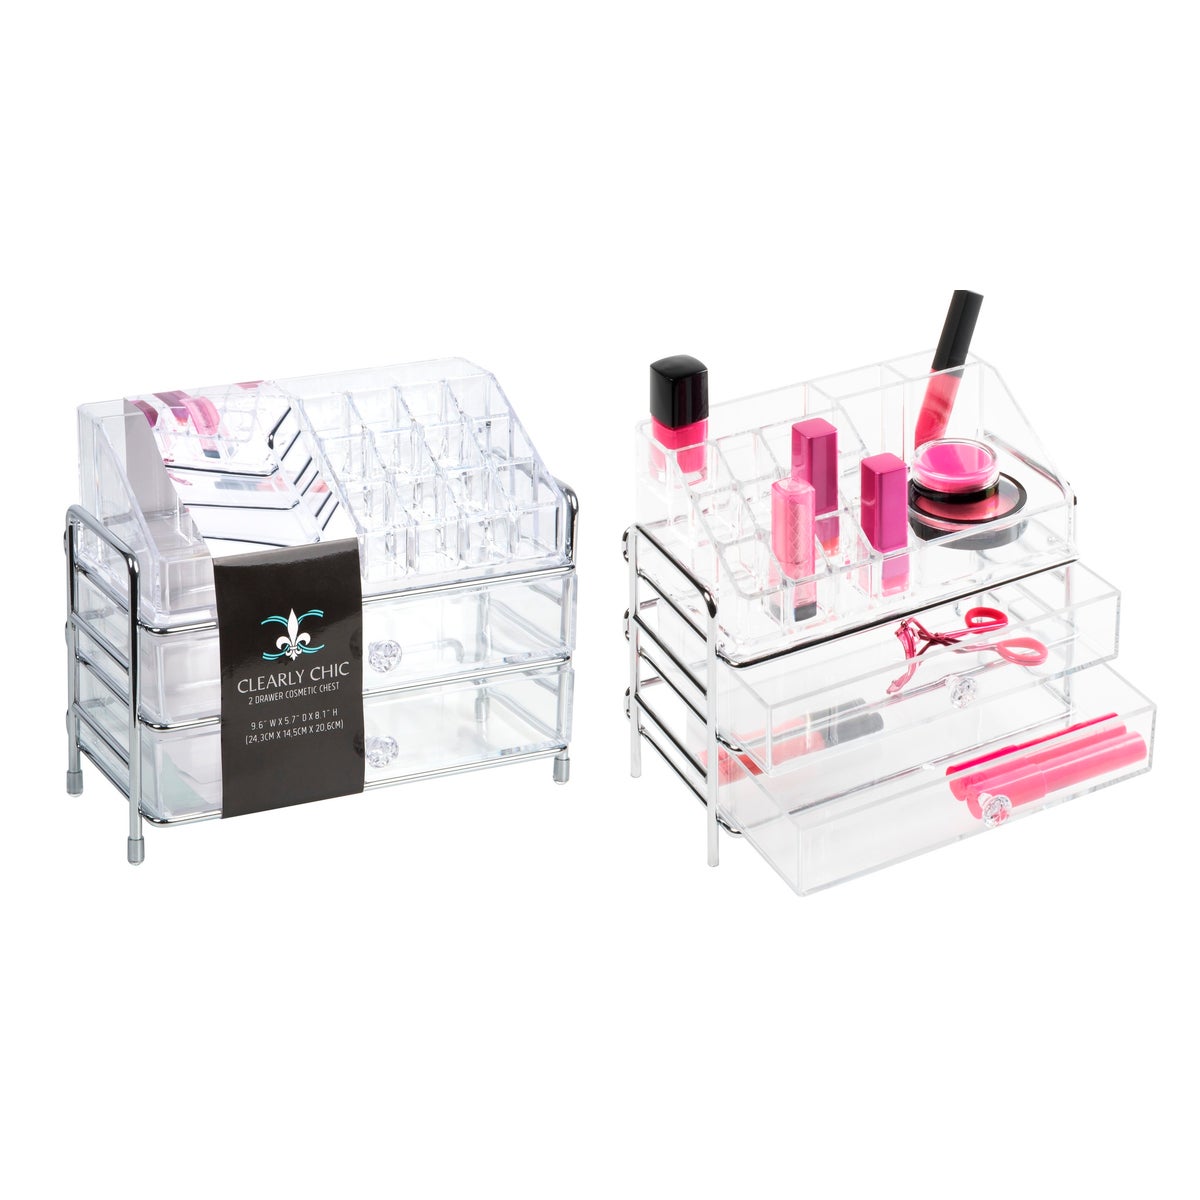 Clearly Chic Deluxe Organizer 2 Drawer (6)